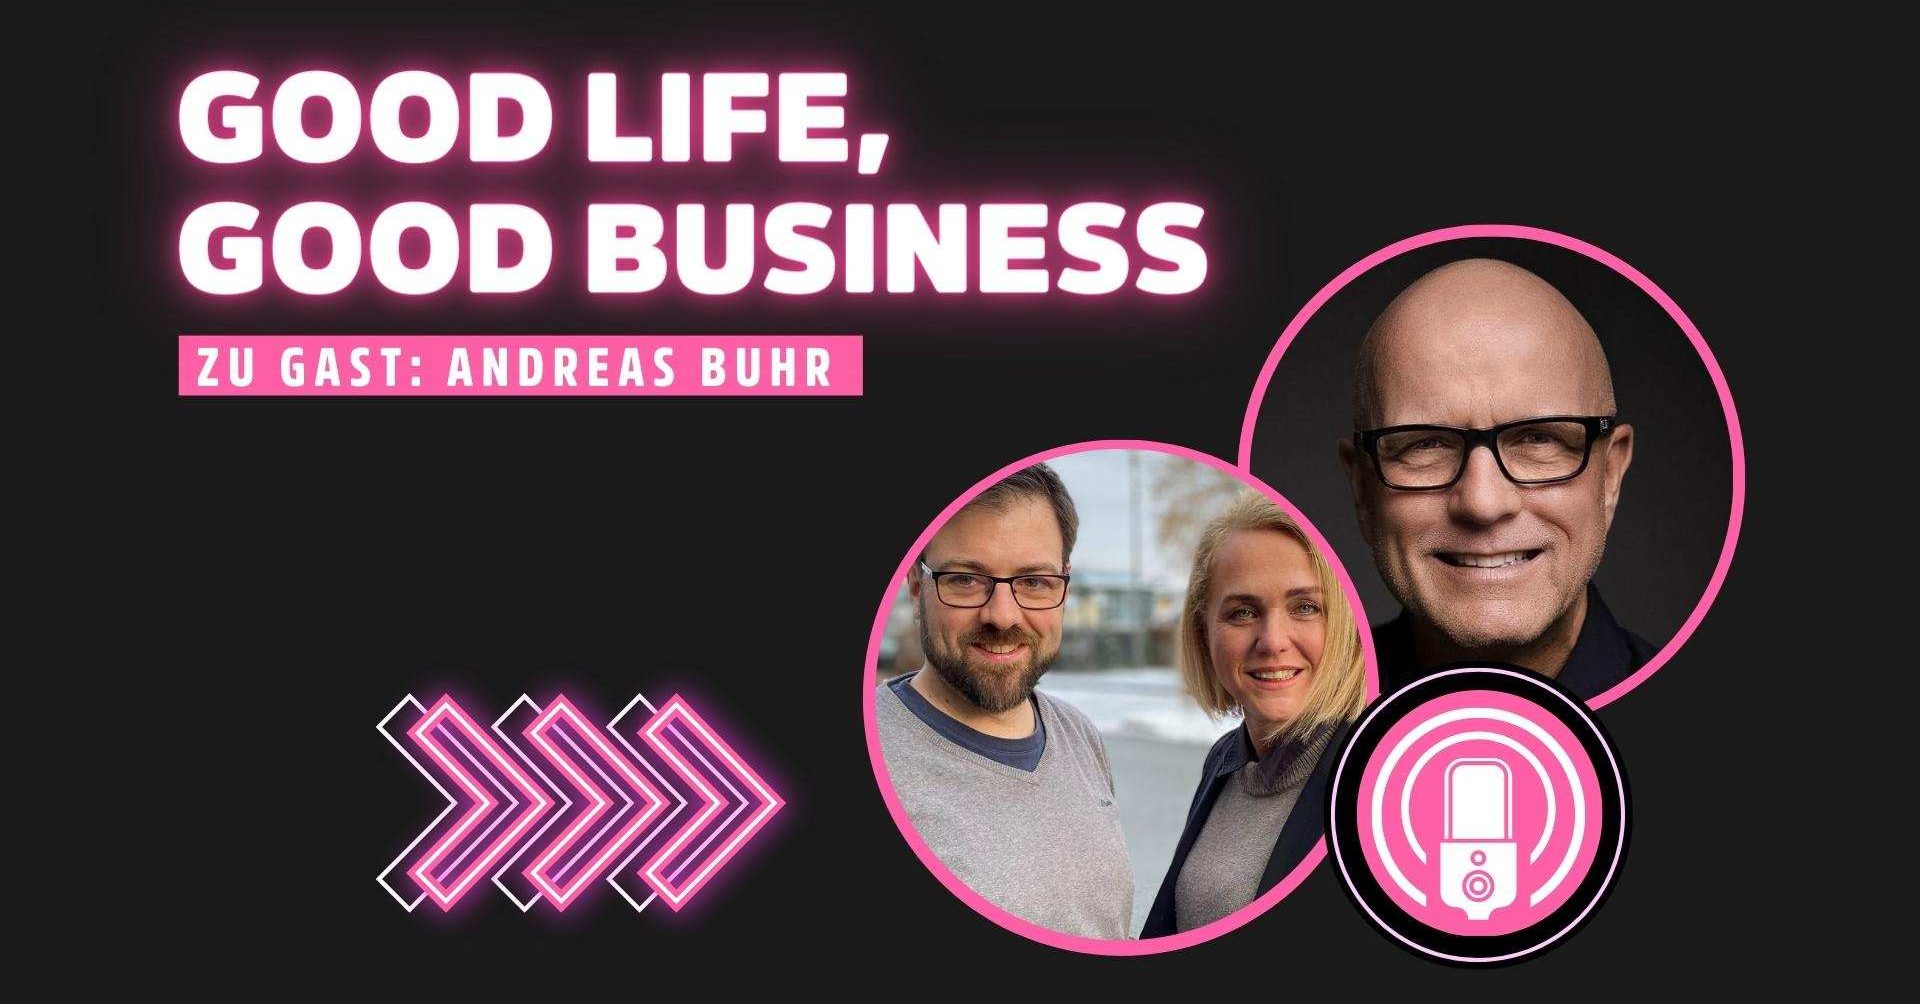 Good life, good business , Andreas Buhr